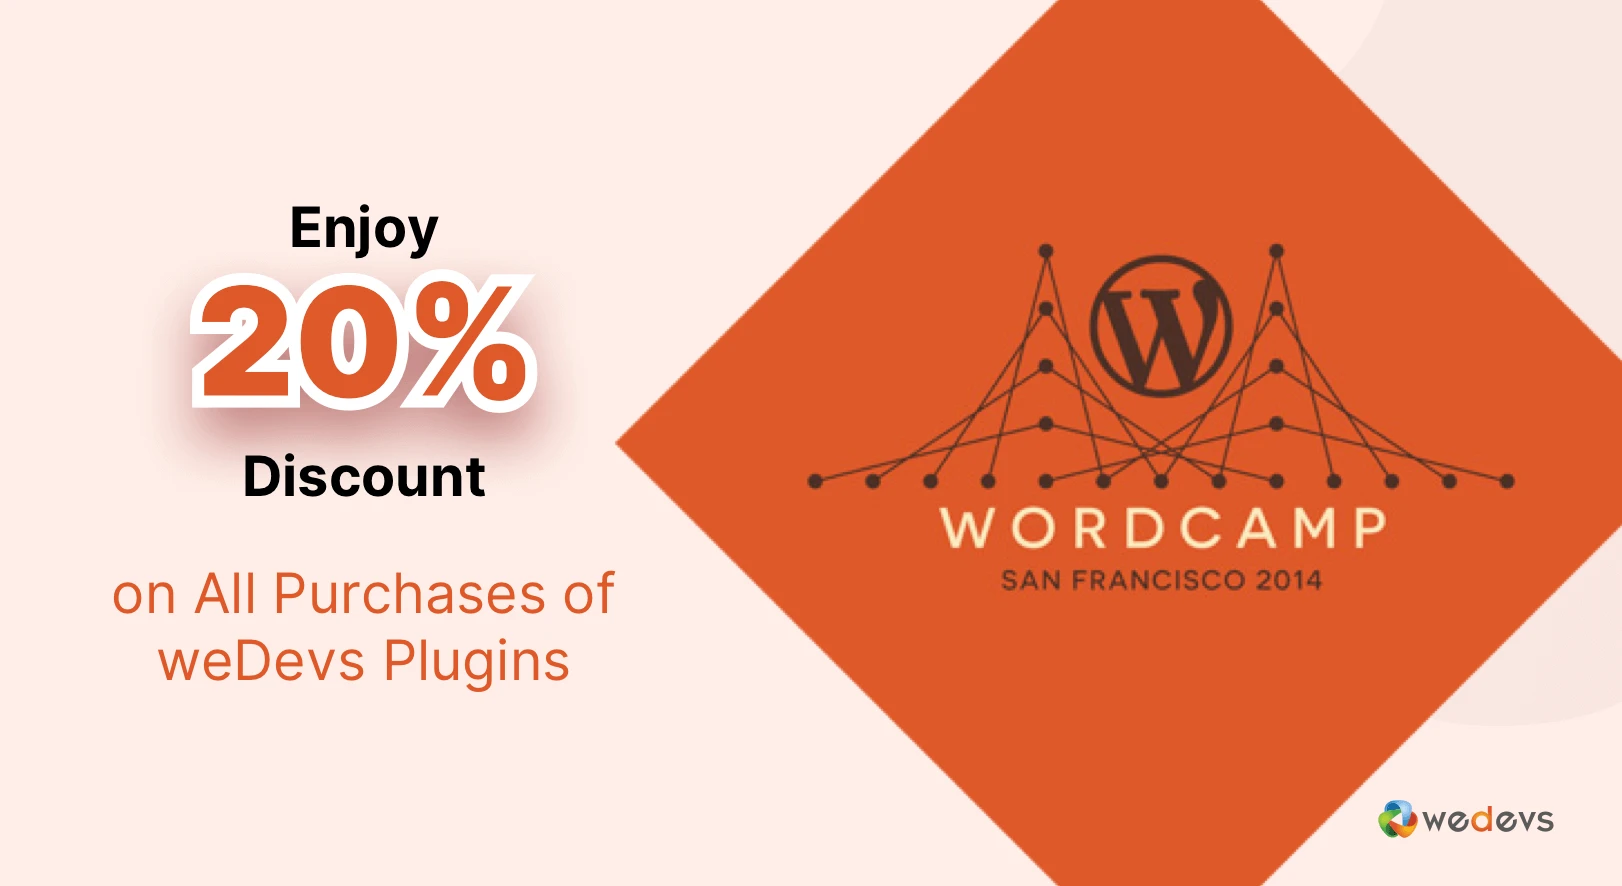 Enjoy 20% Discount on All Purchases of weDevs Plugins during WordCamp San Francisco